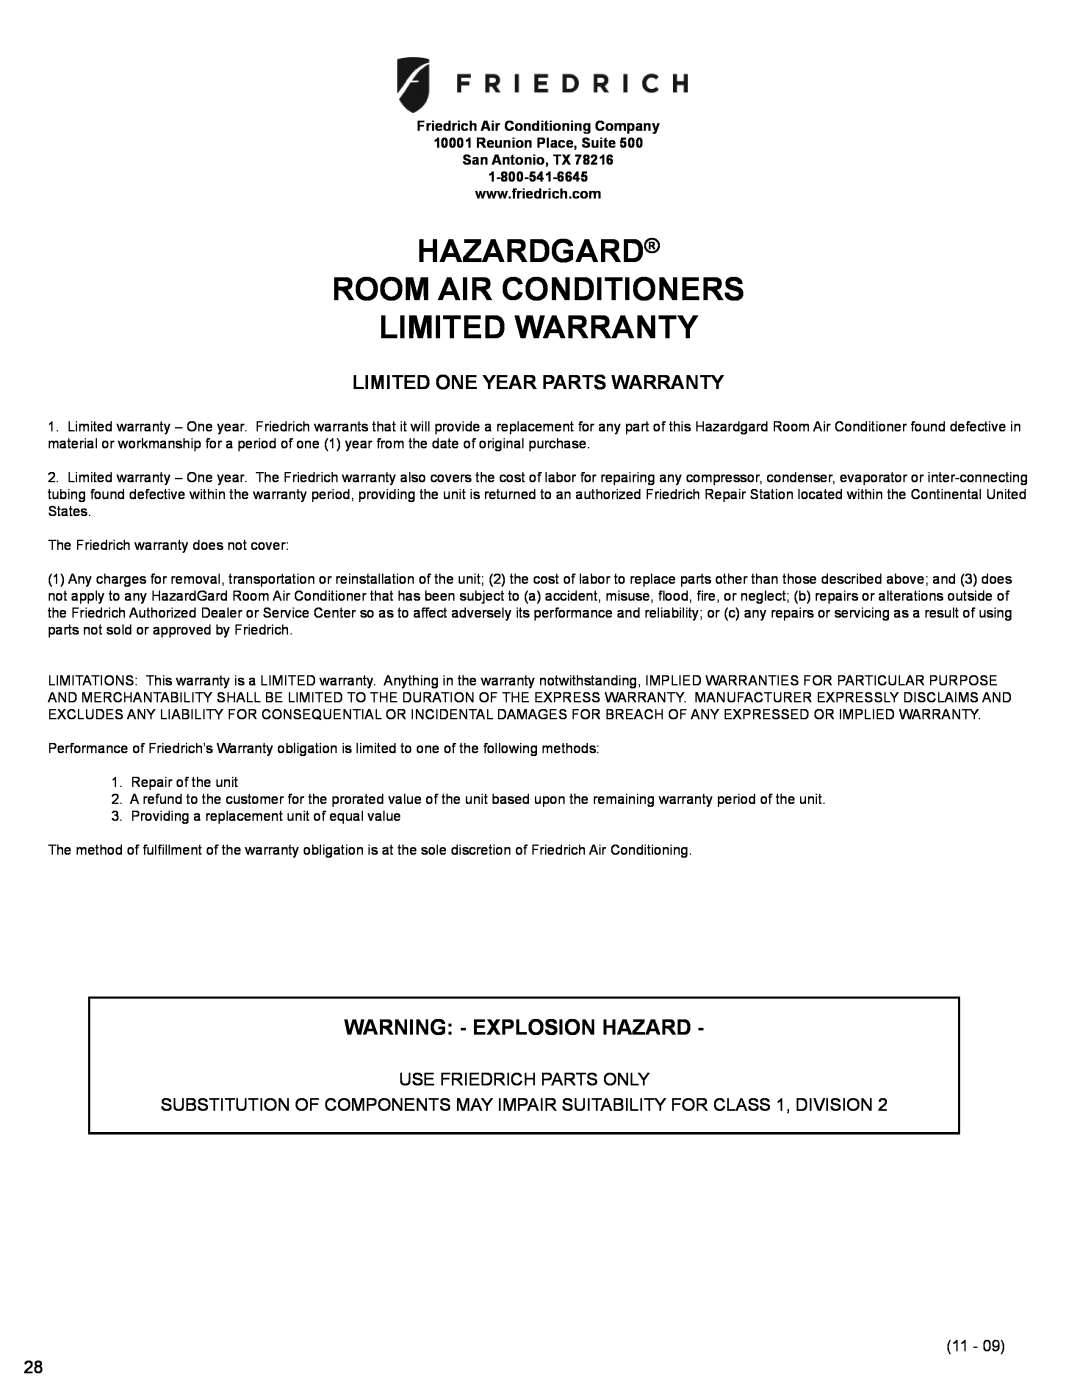 Friedrich R-410A service manual Hazardgard Room Air Conditioners Limited Warranty, Friedrich Air Conditioning Company 